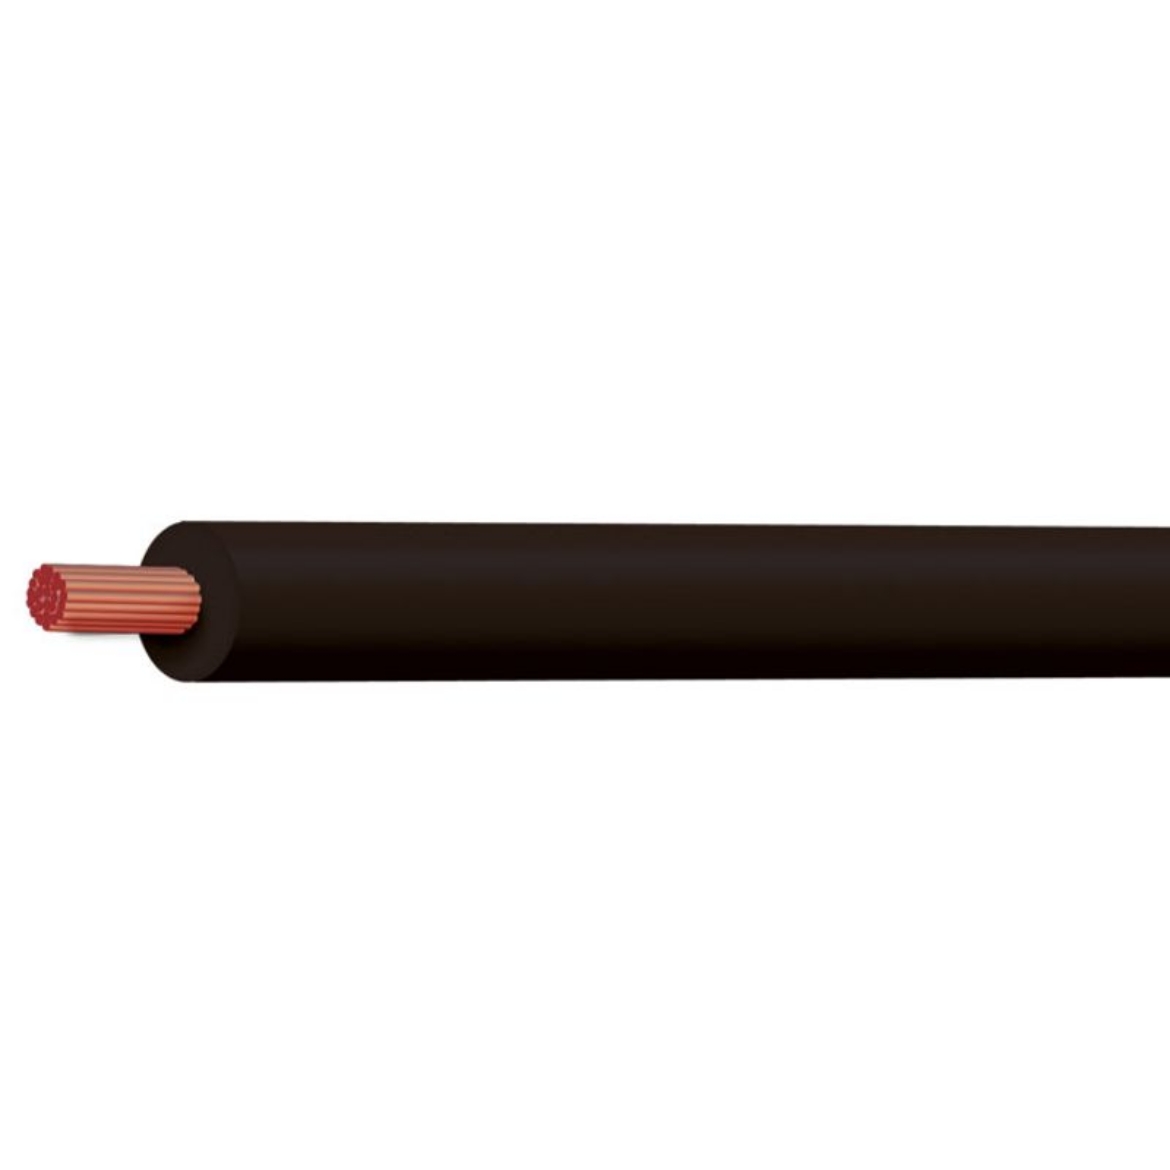 Picture of TYCAB SINGLE CORE CABLE BATTERY 0 B&S CROSS SECT 49.2MM SQ RATING 315A BLACK CUT - PER METER